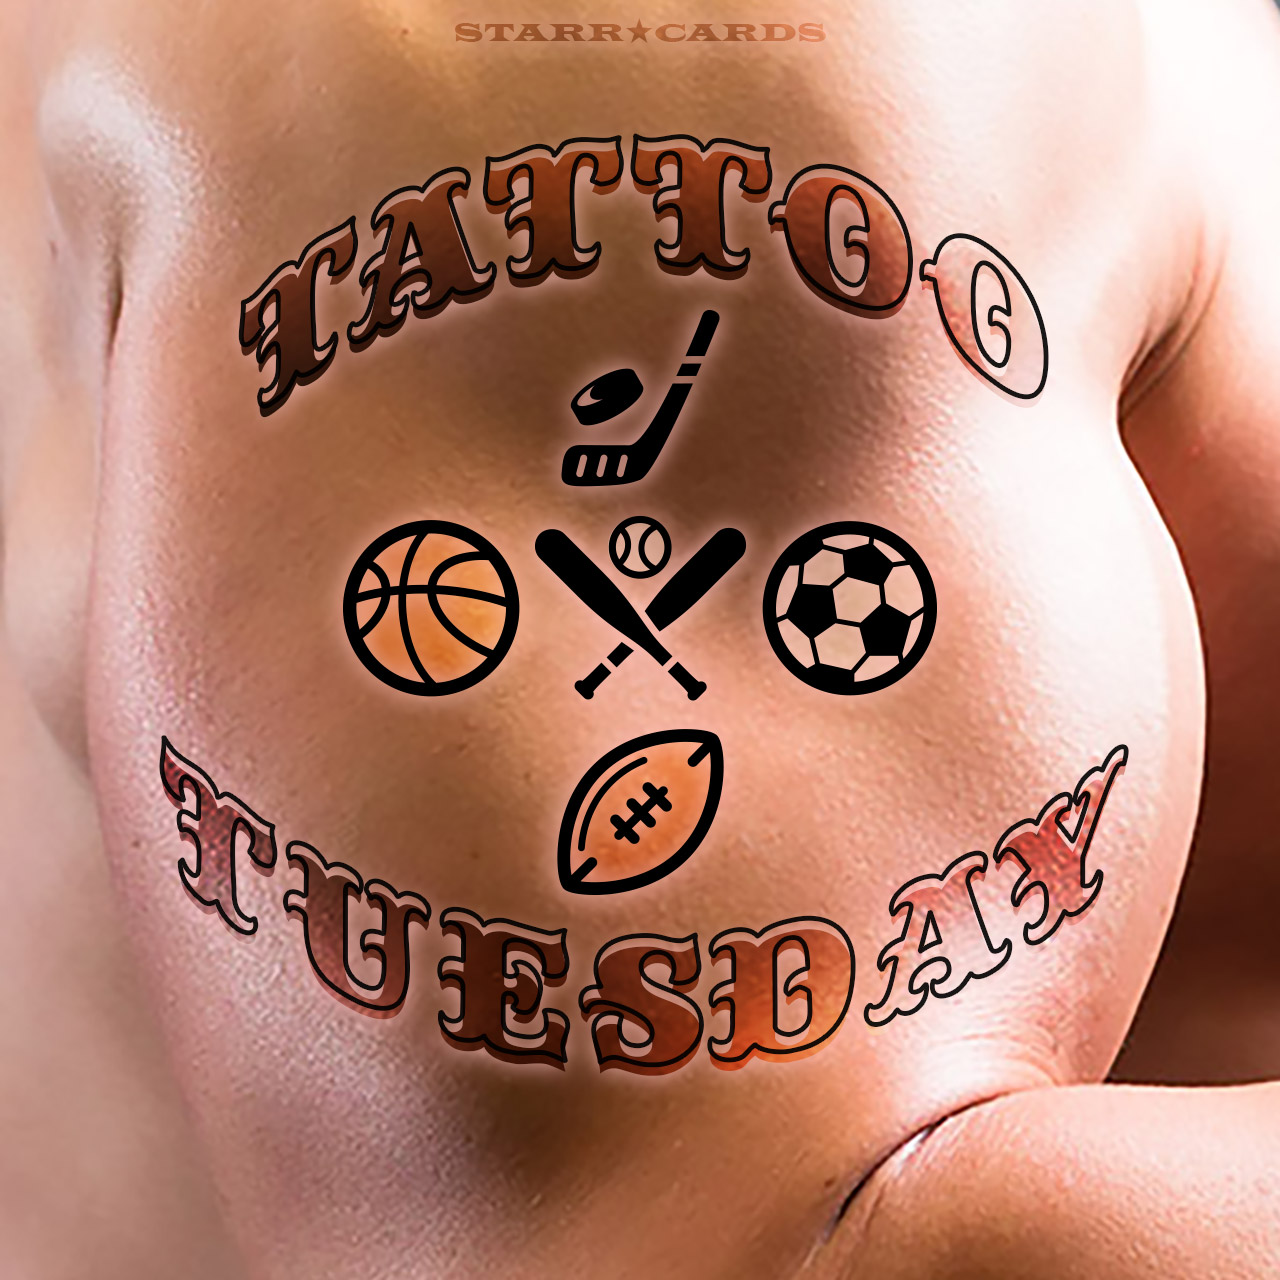 Tattoo Tuesday: Check out the best Arsenal FC fans' ink